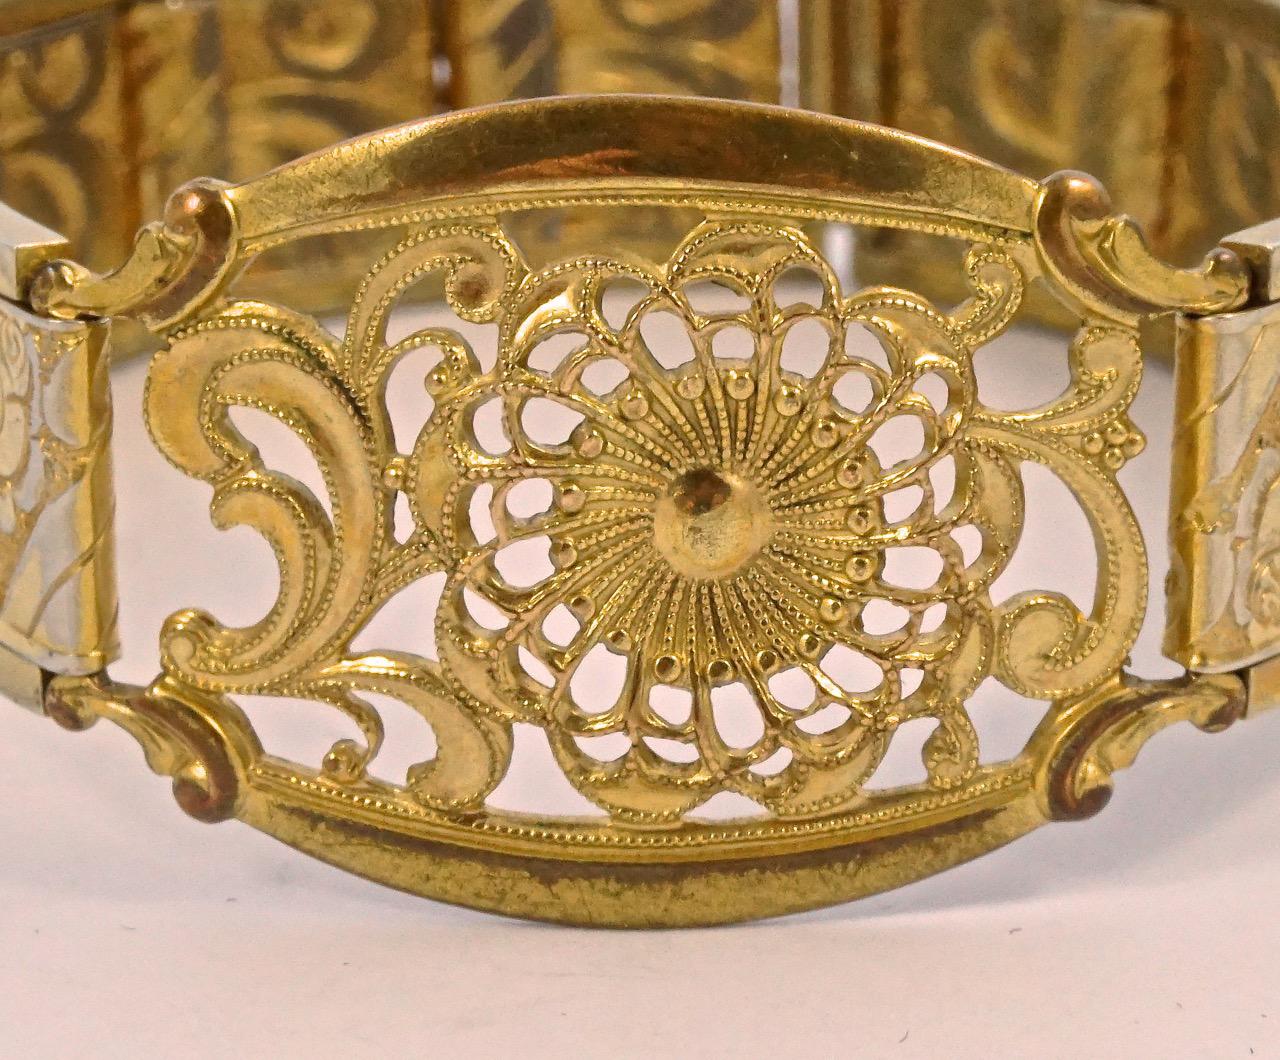 Gold plated expansion bracelet with engraved flower links and a lovely centre decorative flower panel. Measuring inside diameter approximately 5.4cm / 2.12 inches by width 1.4cm / .55 inch. There is some wear to the gold plating.

This is a